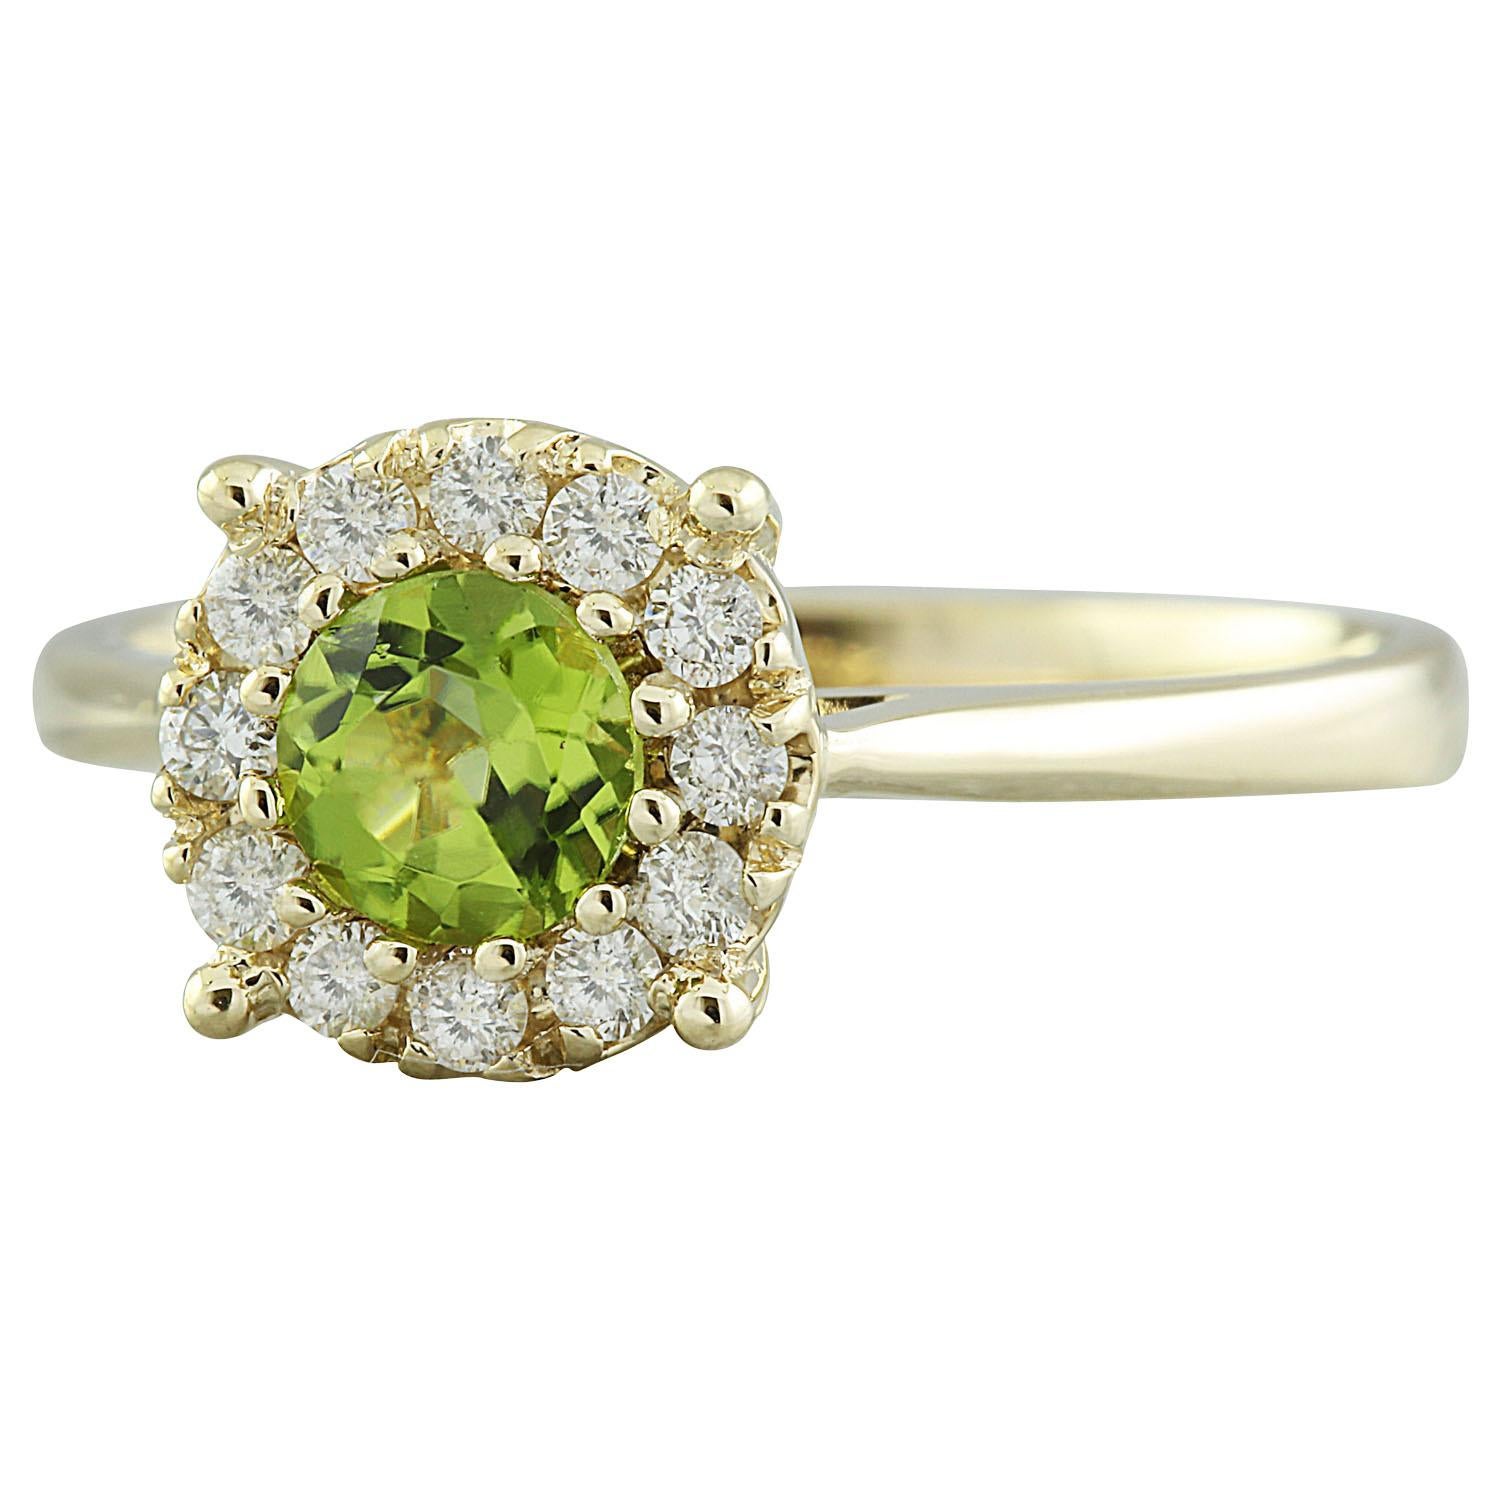 0.72 Carat Natural Peridot 14 Karat Solid Yellow Gold Diamond Ring
Stamped: 14K 
Total Ring Weight: 2.9 Grams 
Peridot Weight: 0.50 Carat (5.00x5.00 Millimeters)
Diamond Weight: 0.22 carat (F-G Color, VS2-SI1 Clarity)
Quantity: 12
Face Measures: